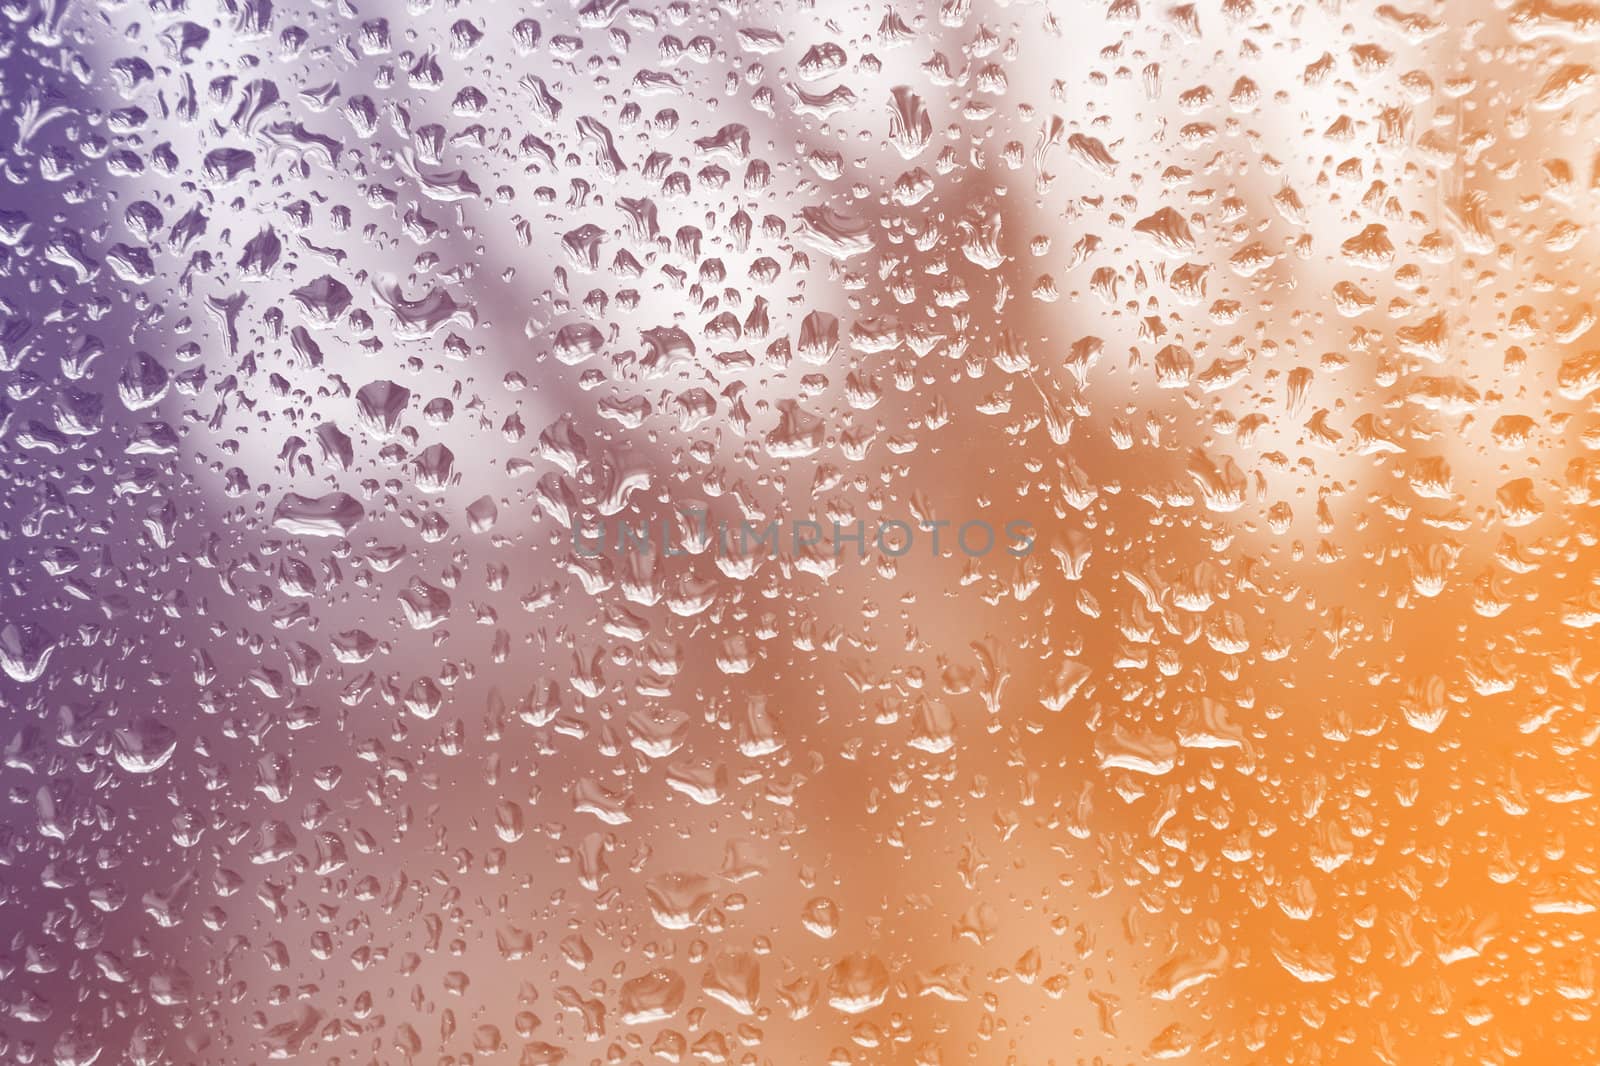 Rain drops on glass close up nice background concept